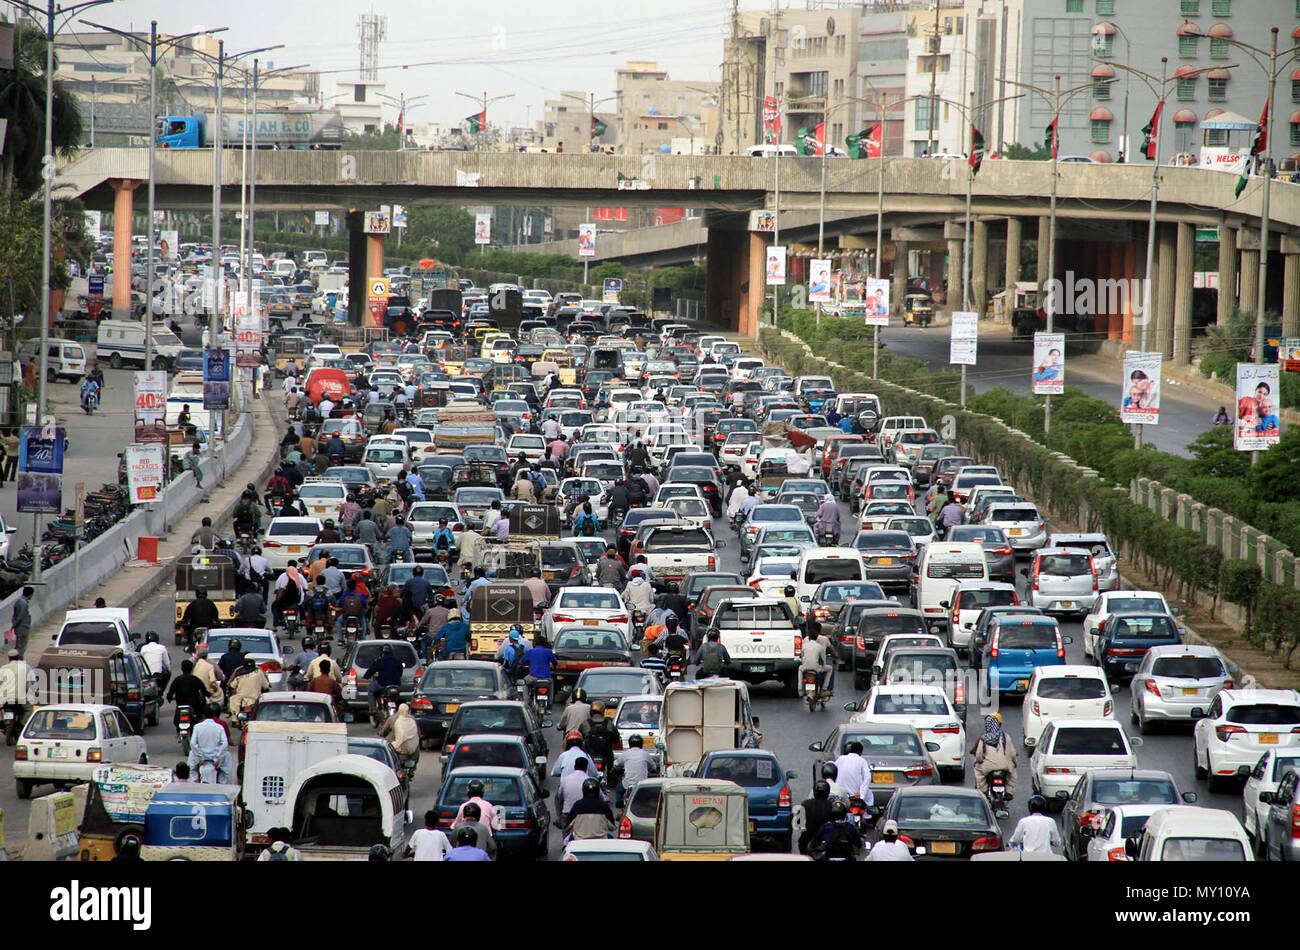 a-large-number-of-vehicles-stuck-in-traffic-jam-before-iftar-during-the-holy-month-of-ramadan-ul-mubarak-at-shahrah-e-faisal-road-in-karachi-on-monday-june-04-2018-MY10YA.jpg